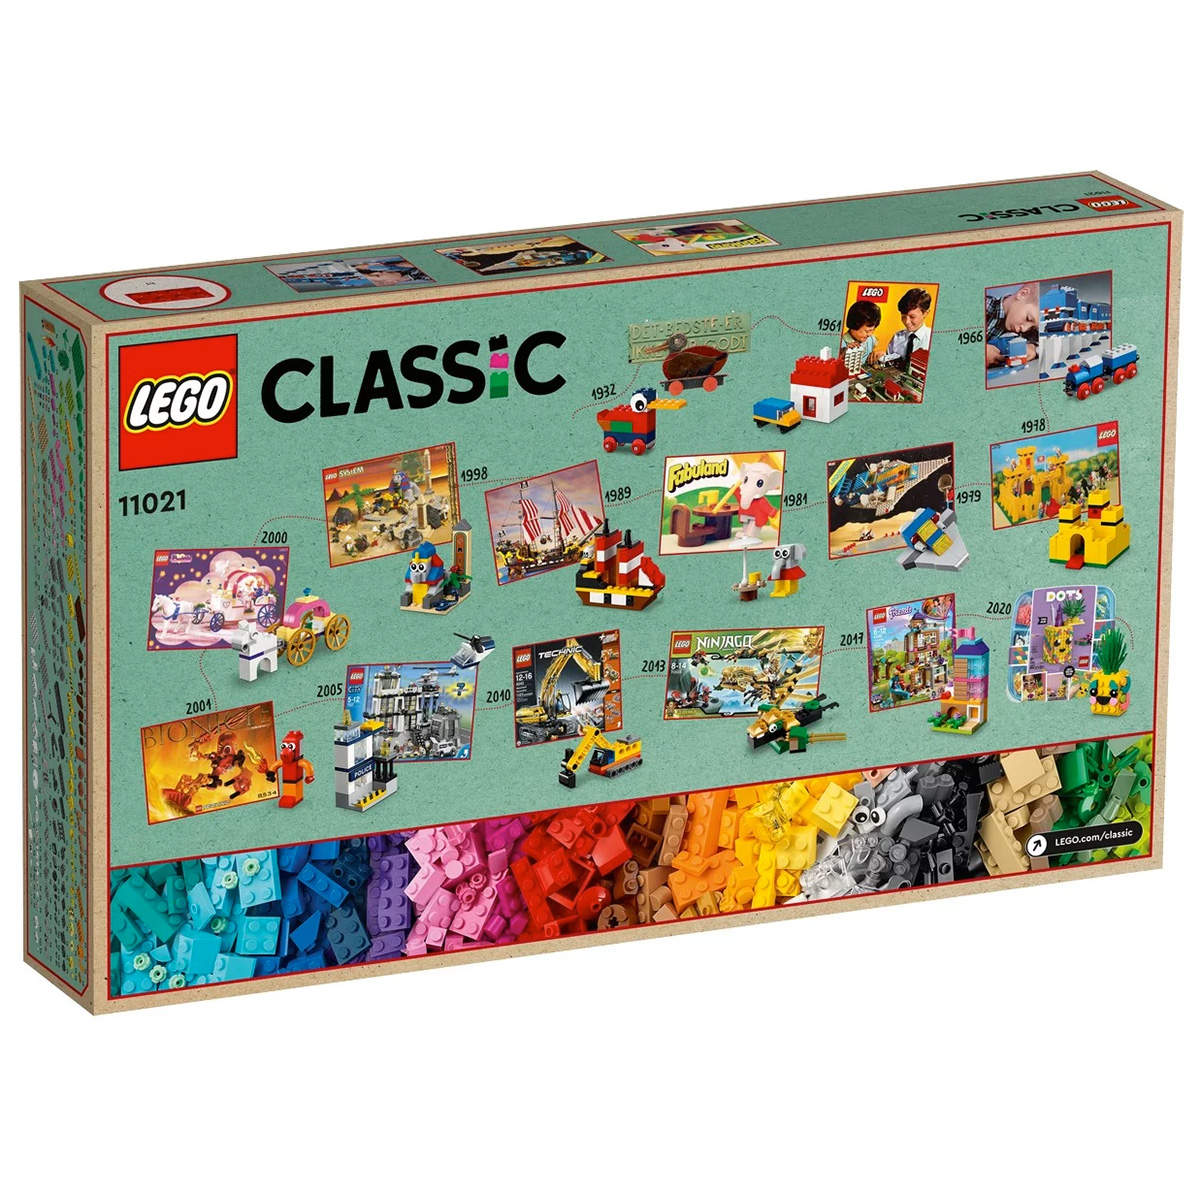 LEGO Classic 90 Years of Play (11021) Product Details - The Brick Fan